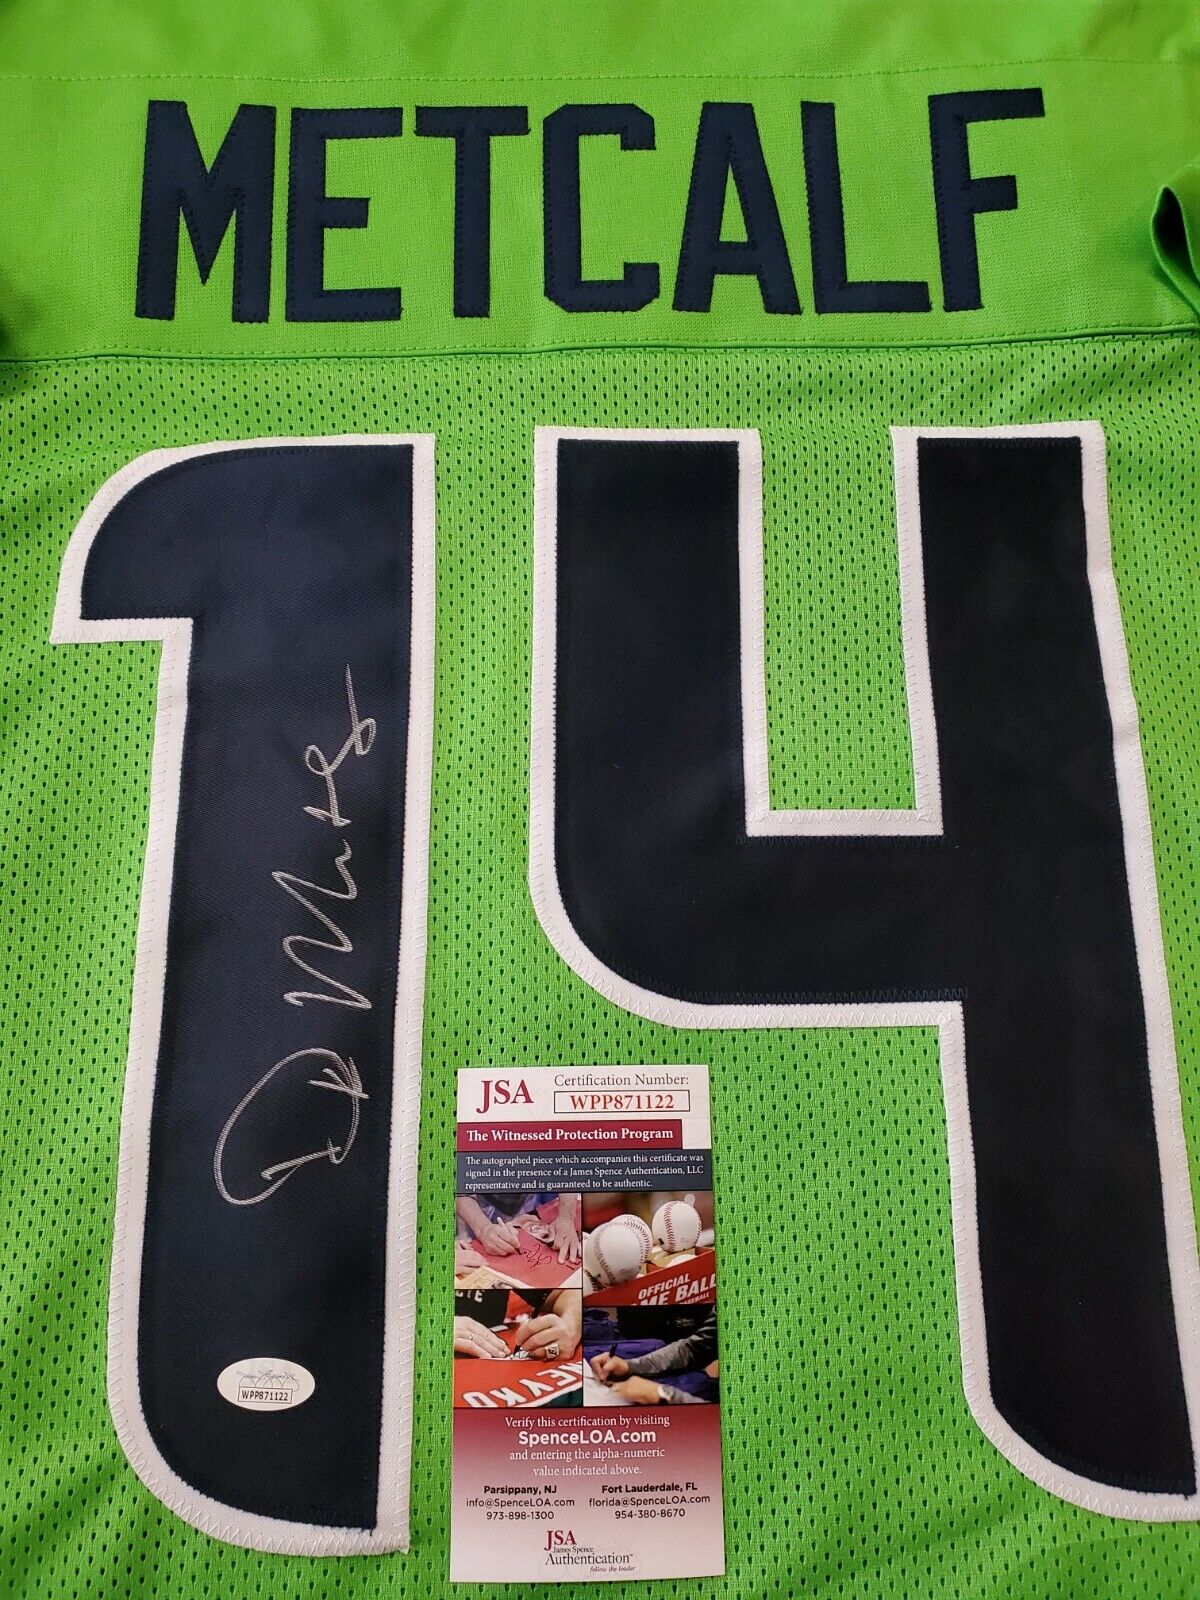 MVP Authentics Seattle Seahawks Dk Metcalf Autographed Signed Jersey Jsa Coa 179.10 sports jersey framing , jersey framing